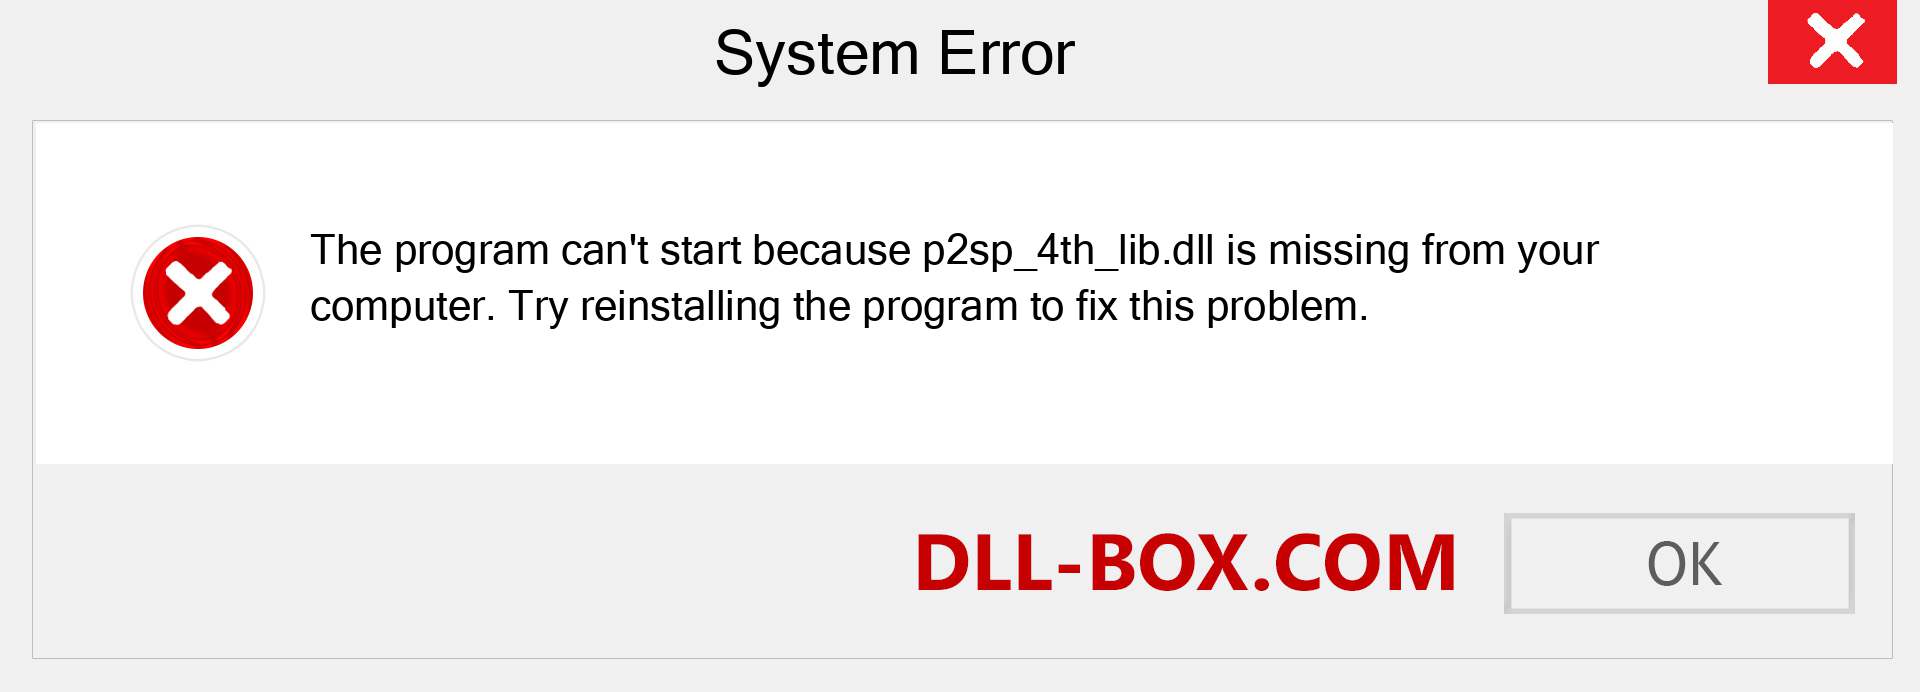  p2sp_4th_lib.dll file is missing?. Download for Windows 7, 8, 10 - Fix  p2sp_4th_lib dll Missing Error on Windows, photos, images